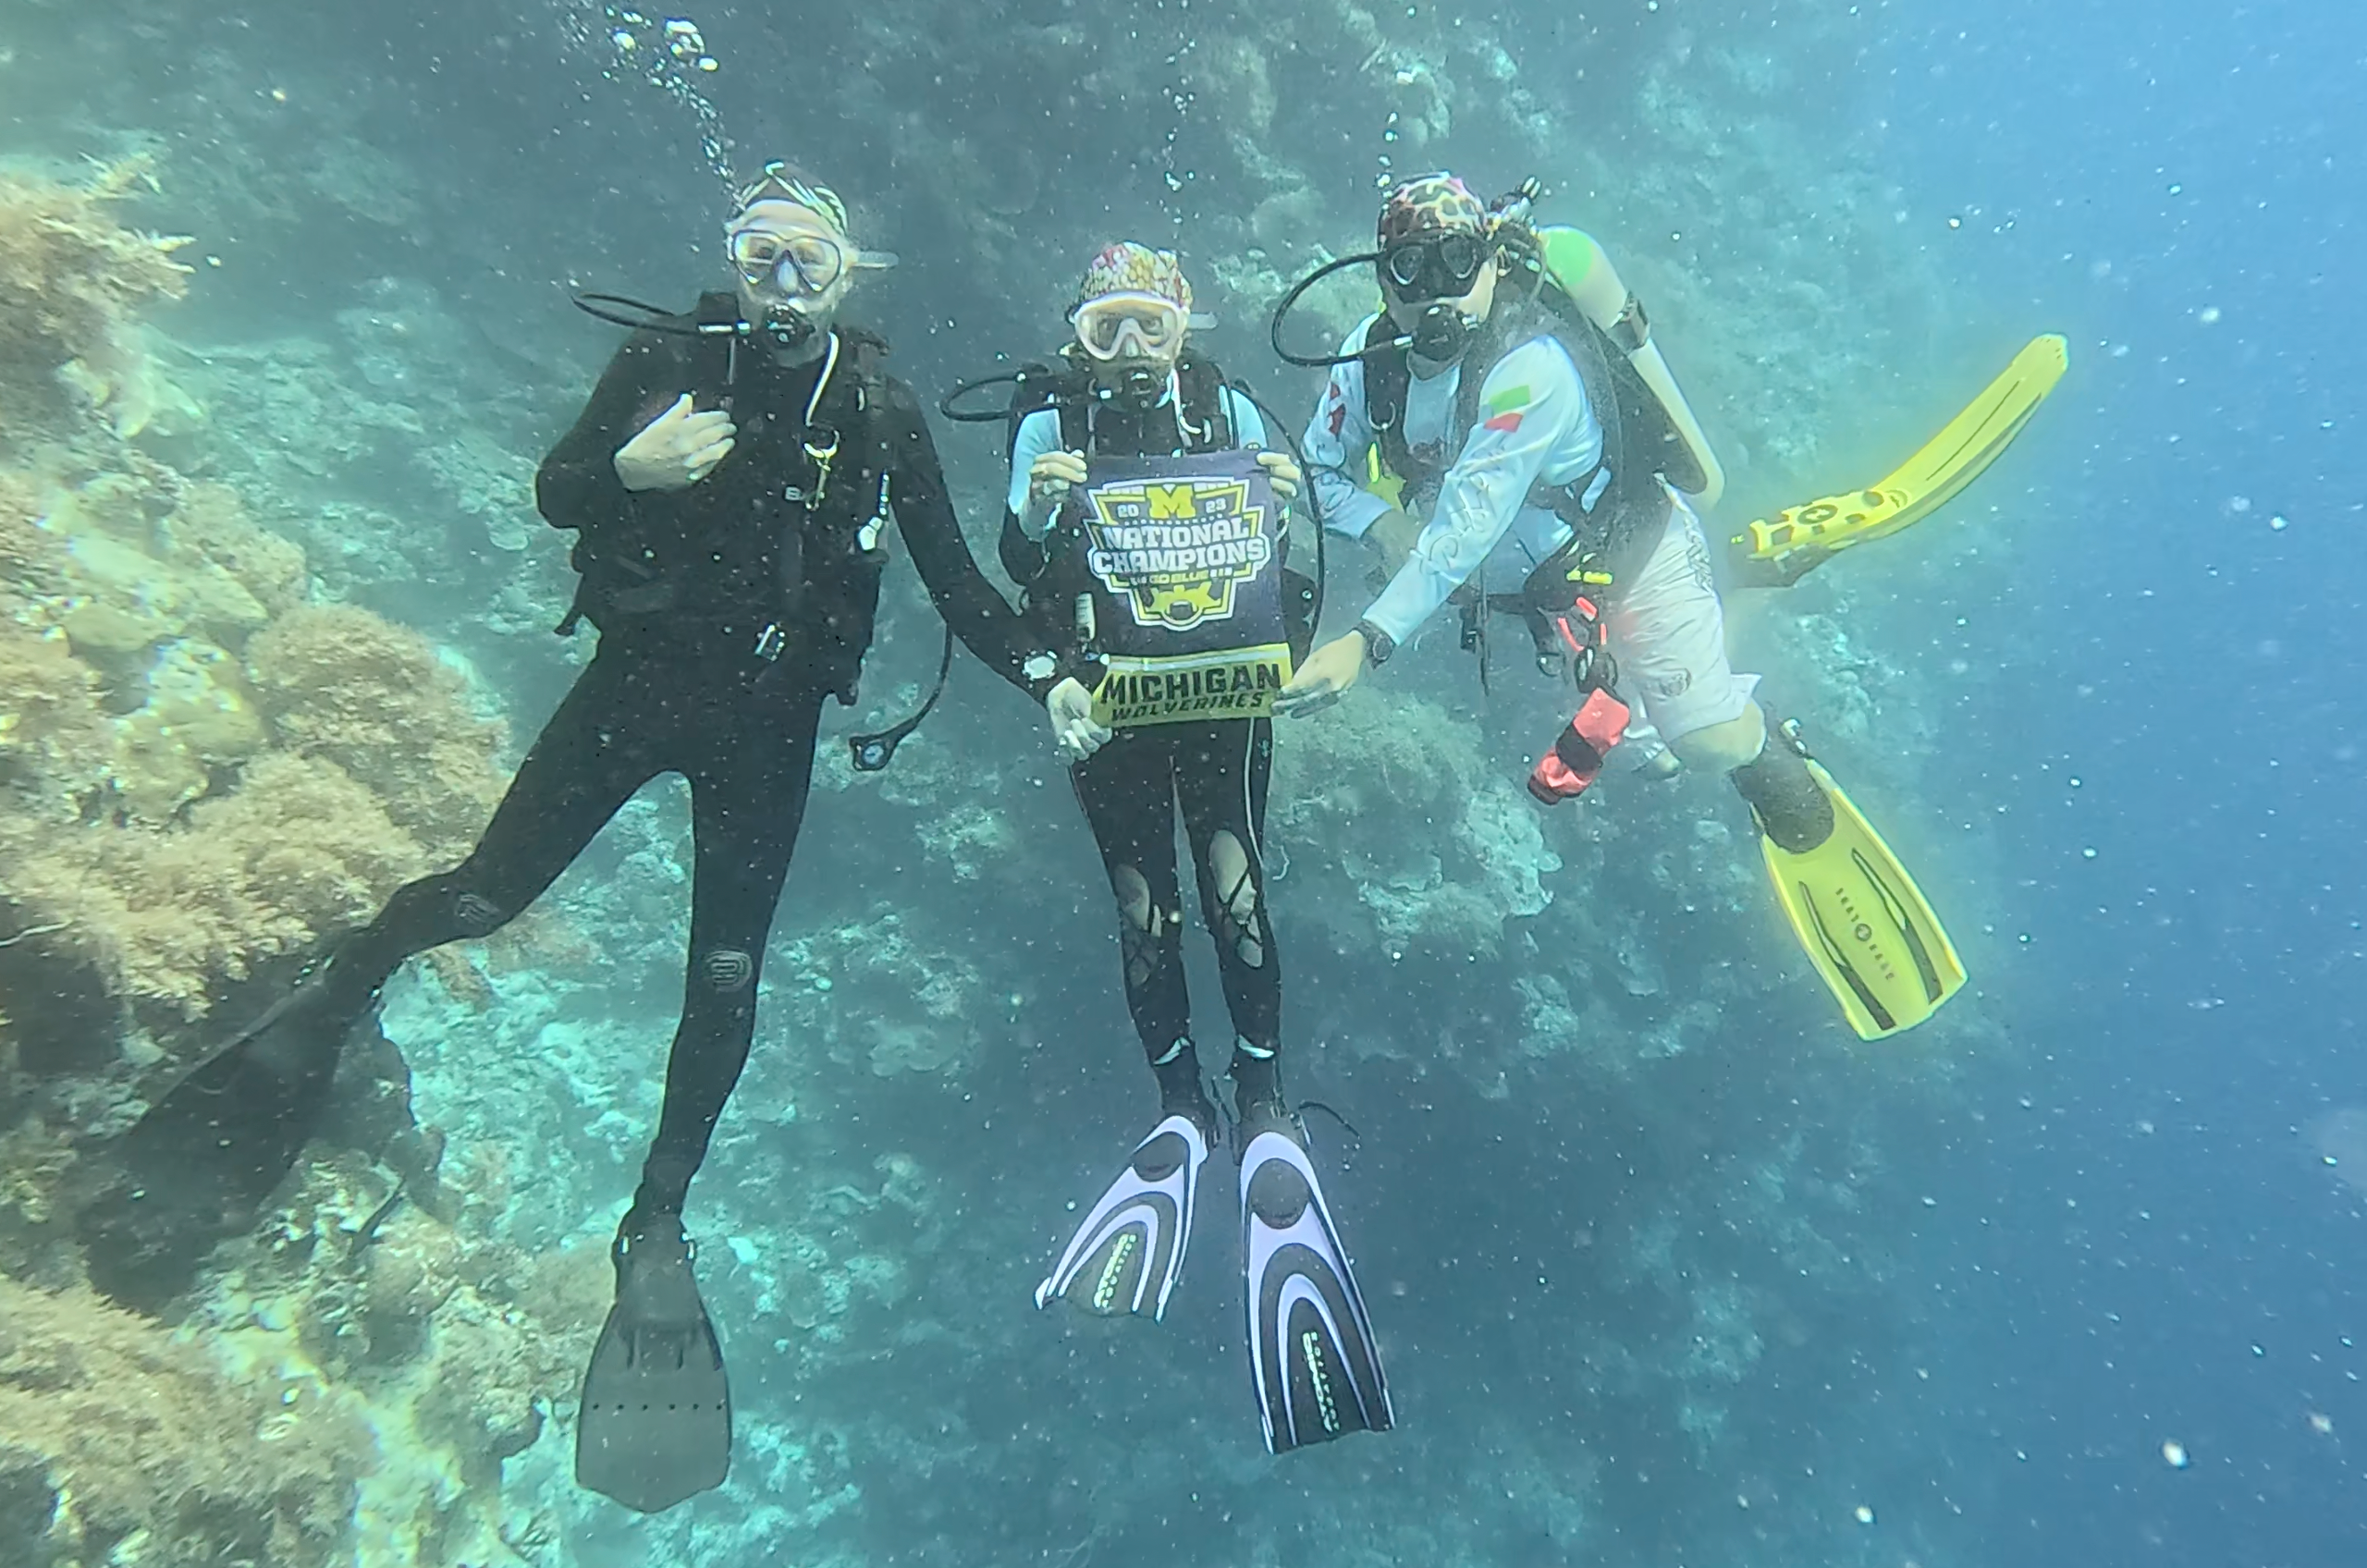 Ted Ross, ’81, Patty Fregolle Ross, ’80, and Bob Fregolle, ’79, celebrated U-M’s College Football Playoff National Championship victory while submerged in the waters of Palau in the Pacific Ocean.